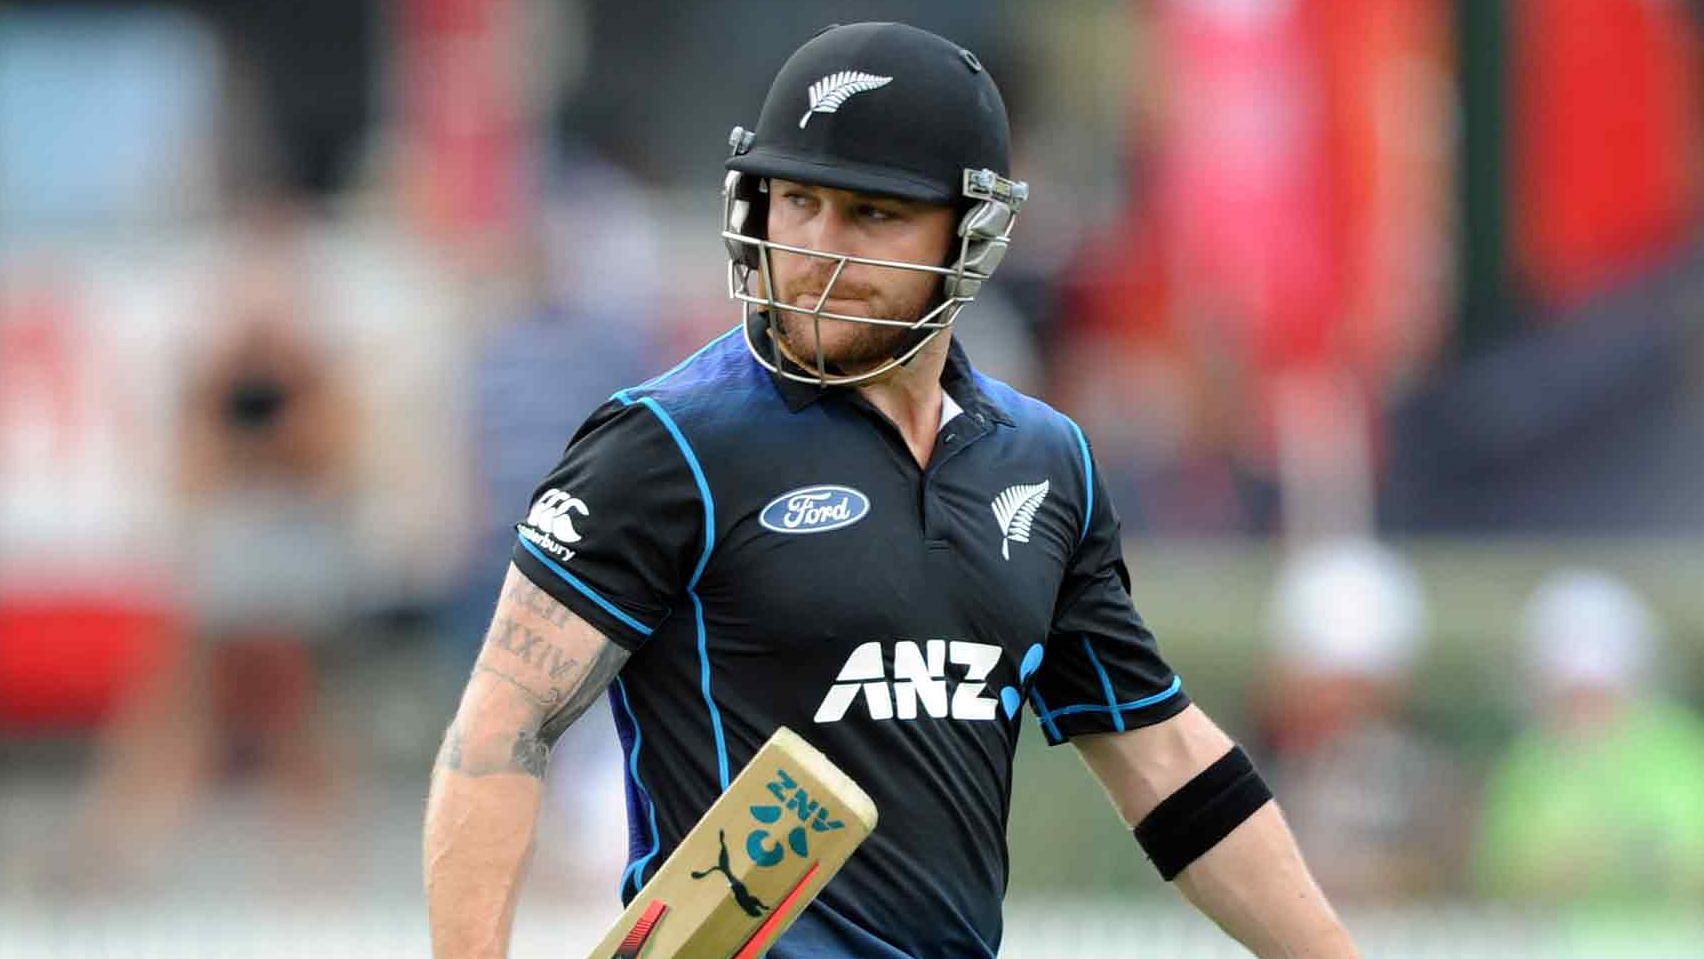 Brendon Mccullum Retirement: The Black Caps reached the final four years ago under the leadership of Brendon Mccullum, only to be soundly beaten by Australia in Melbourne.